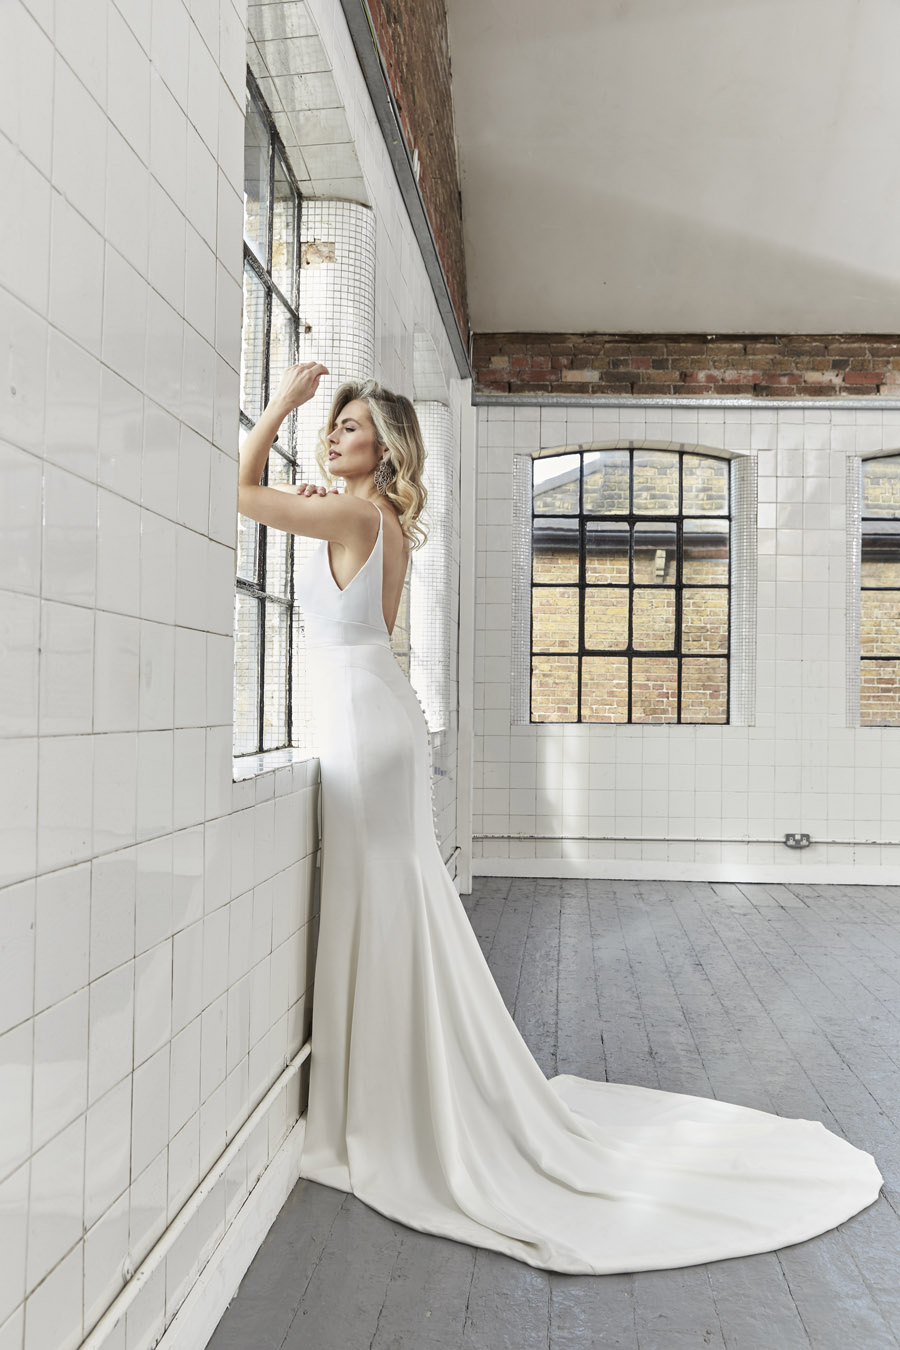 5 Wedding Dresses For the Romantic Bride - Sassi Holford